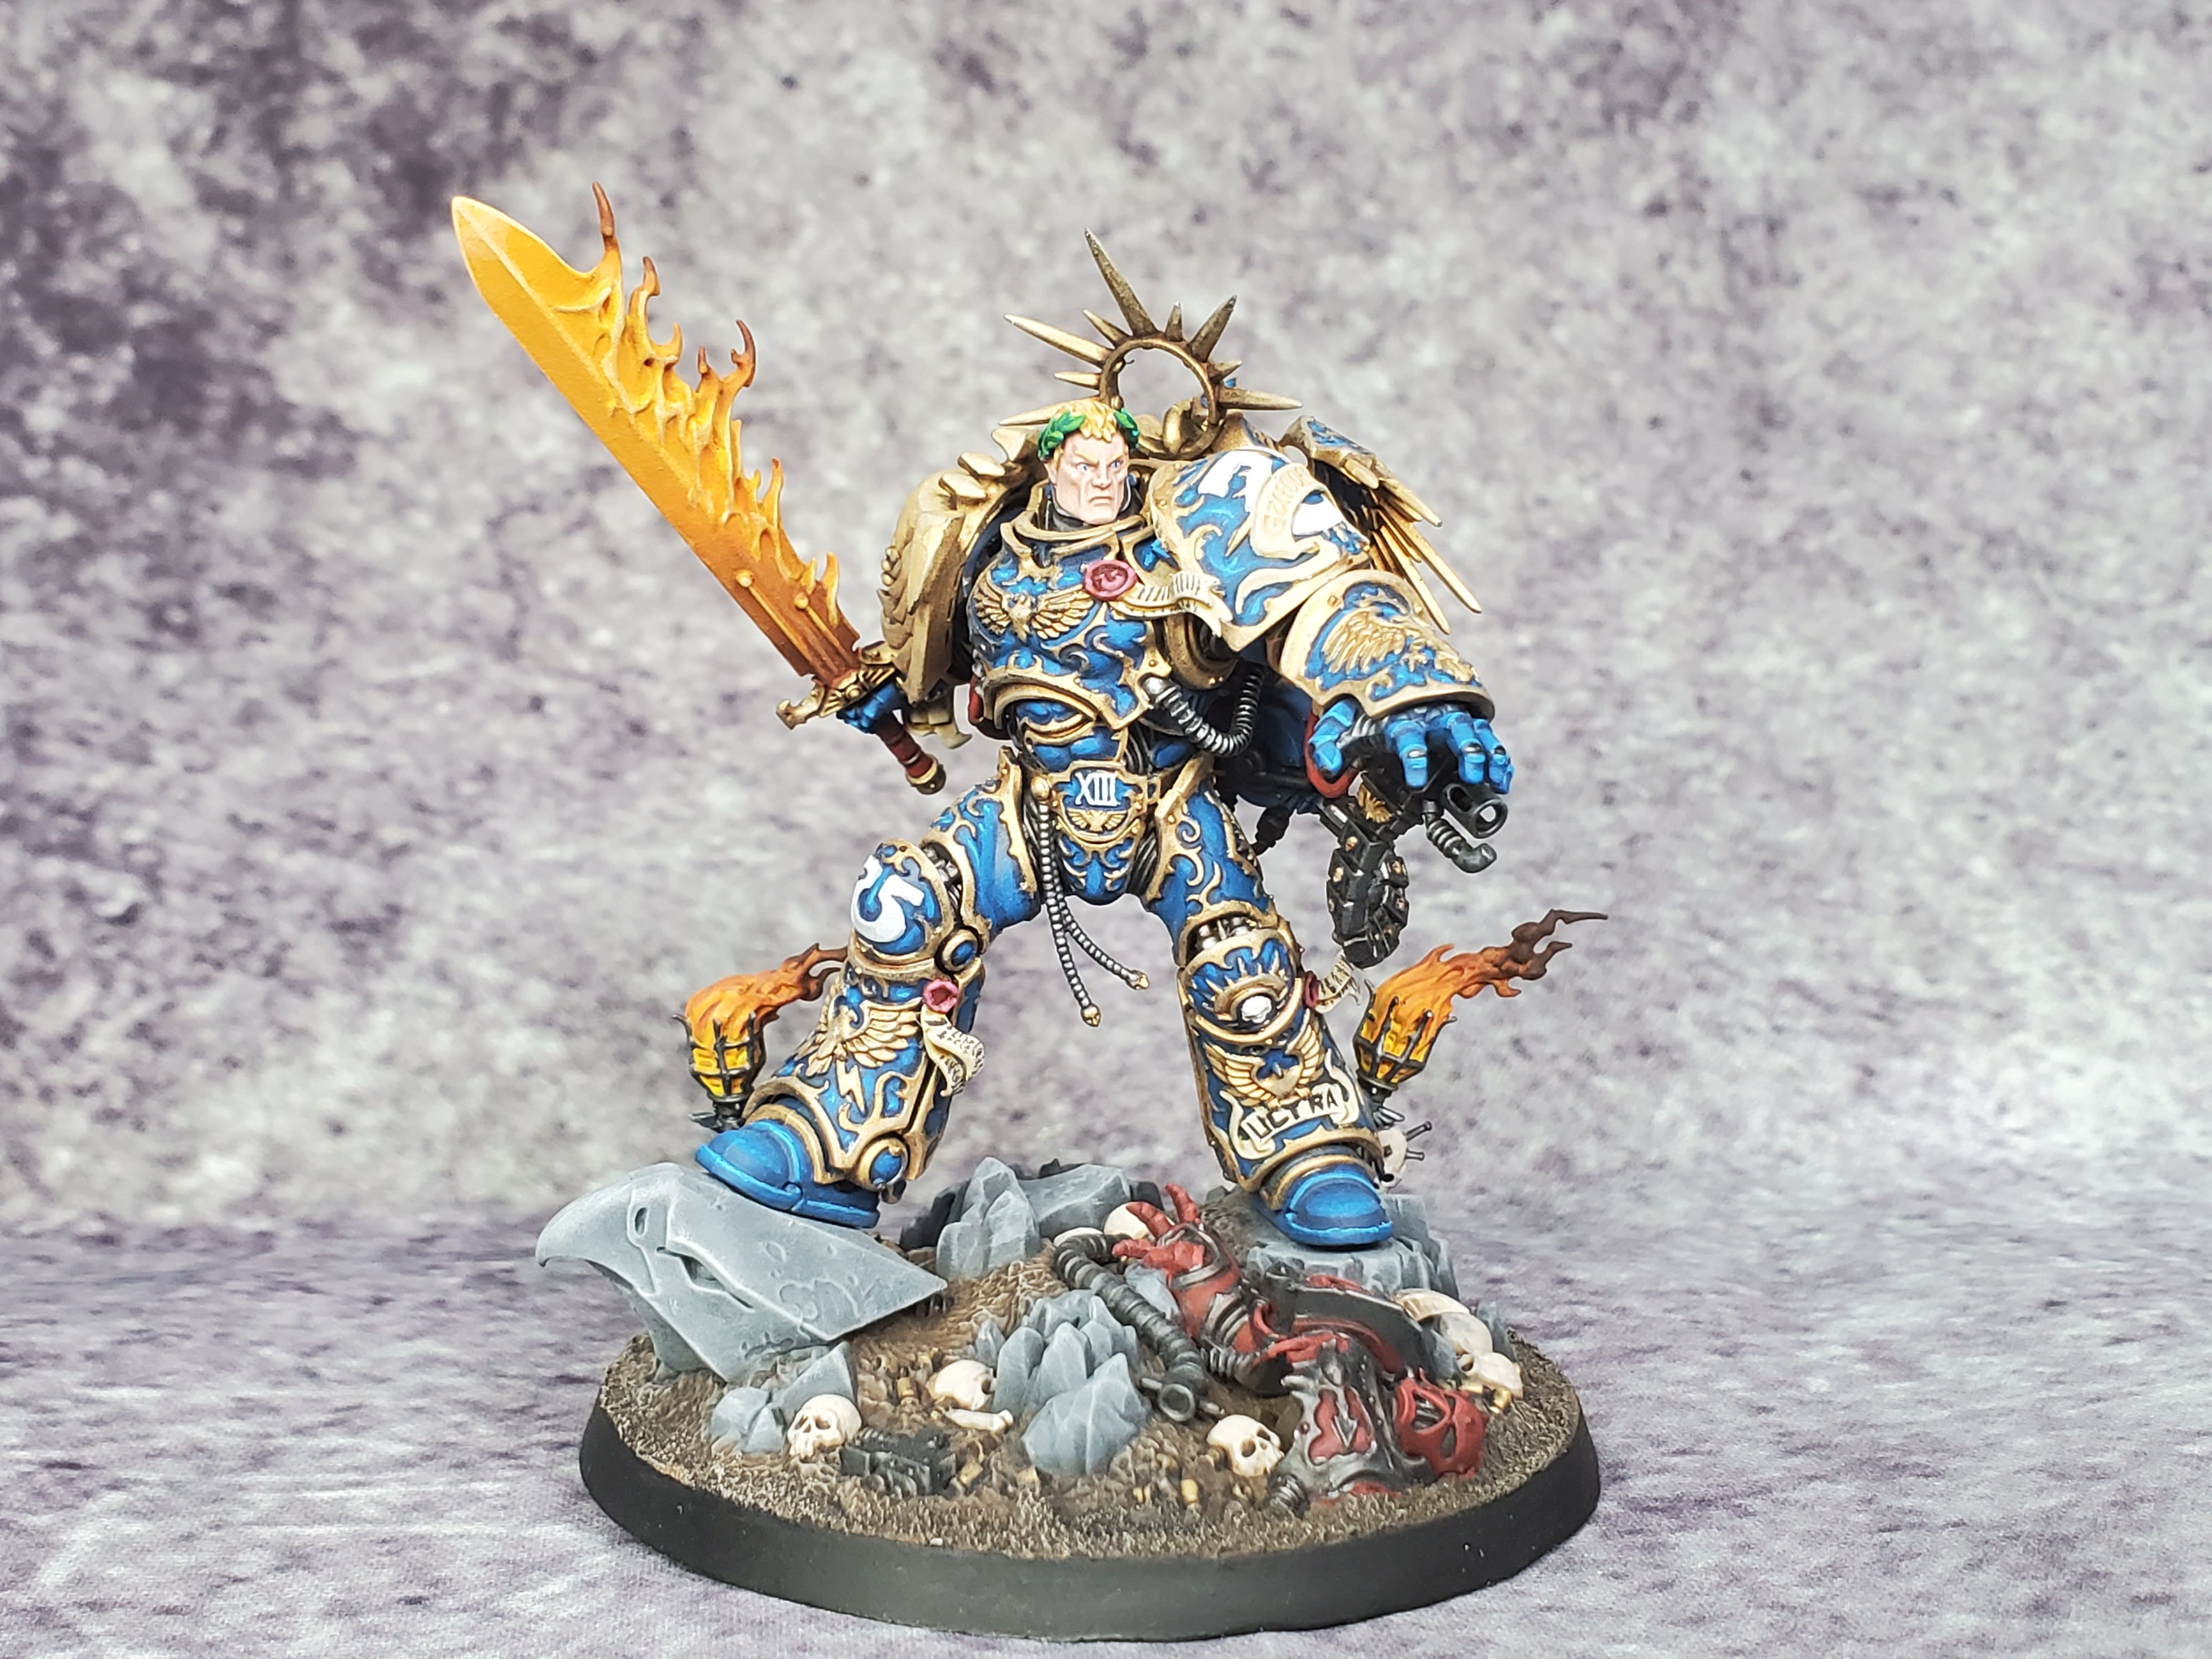 Paint your warhammer army by Paintingdad